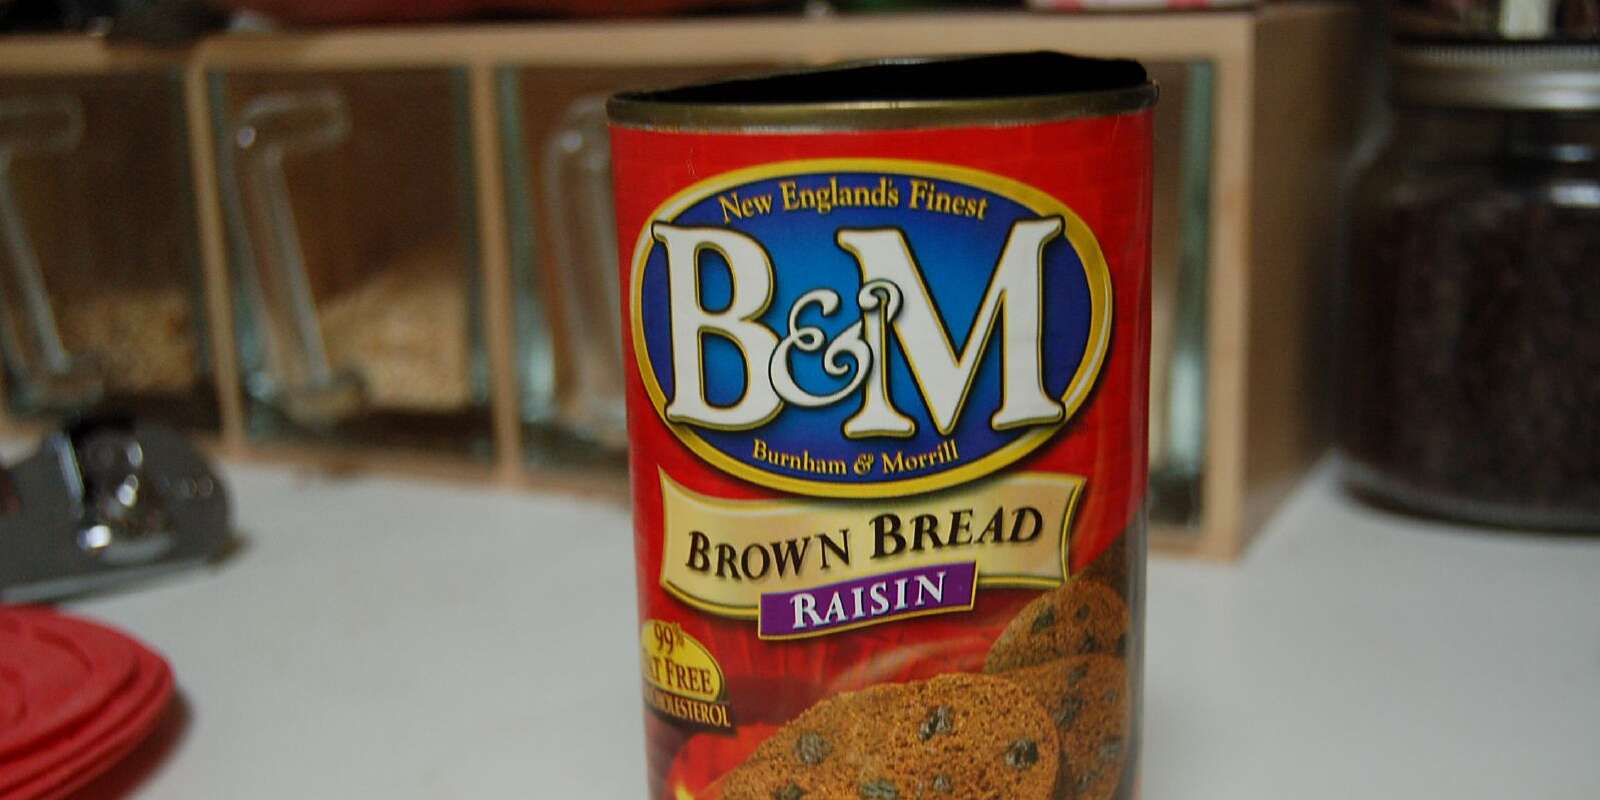 What Is Canned Bread?